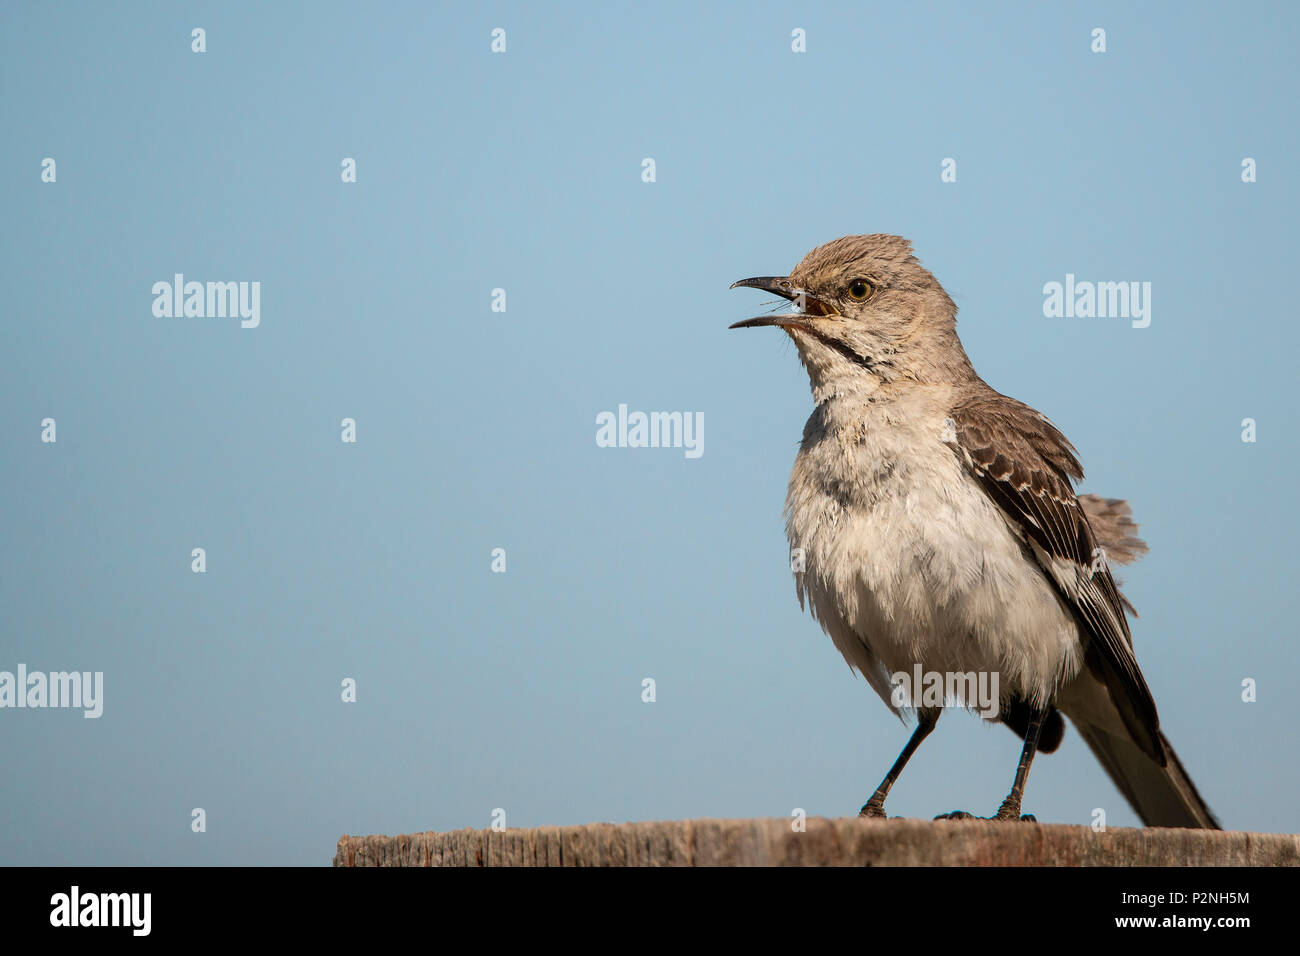 Northern Mockingbird (Mimus Polyglottos) is an omnivorous songbird native to North America. It is known for mimicking birdsongs in its environment Stock Photo